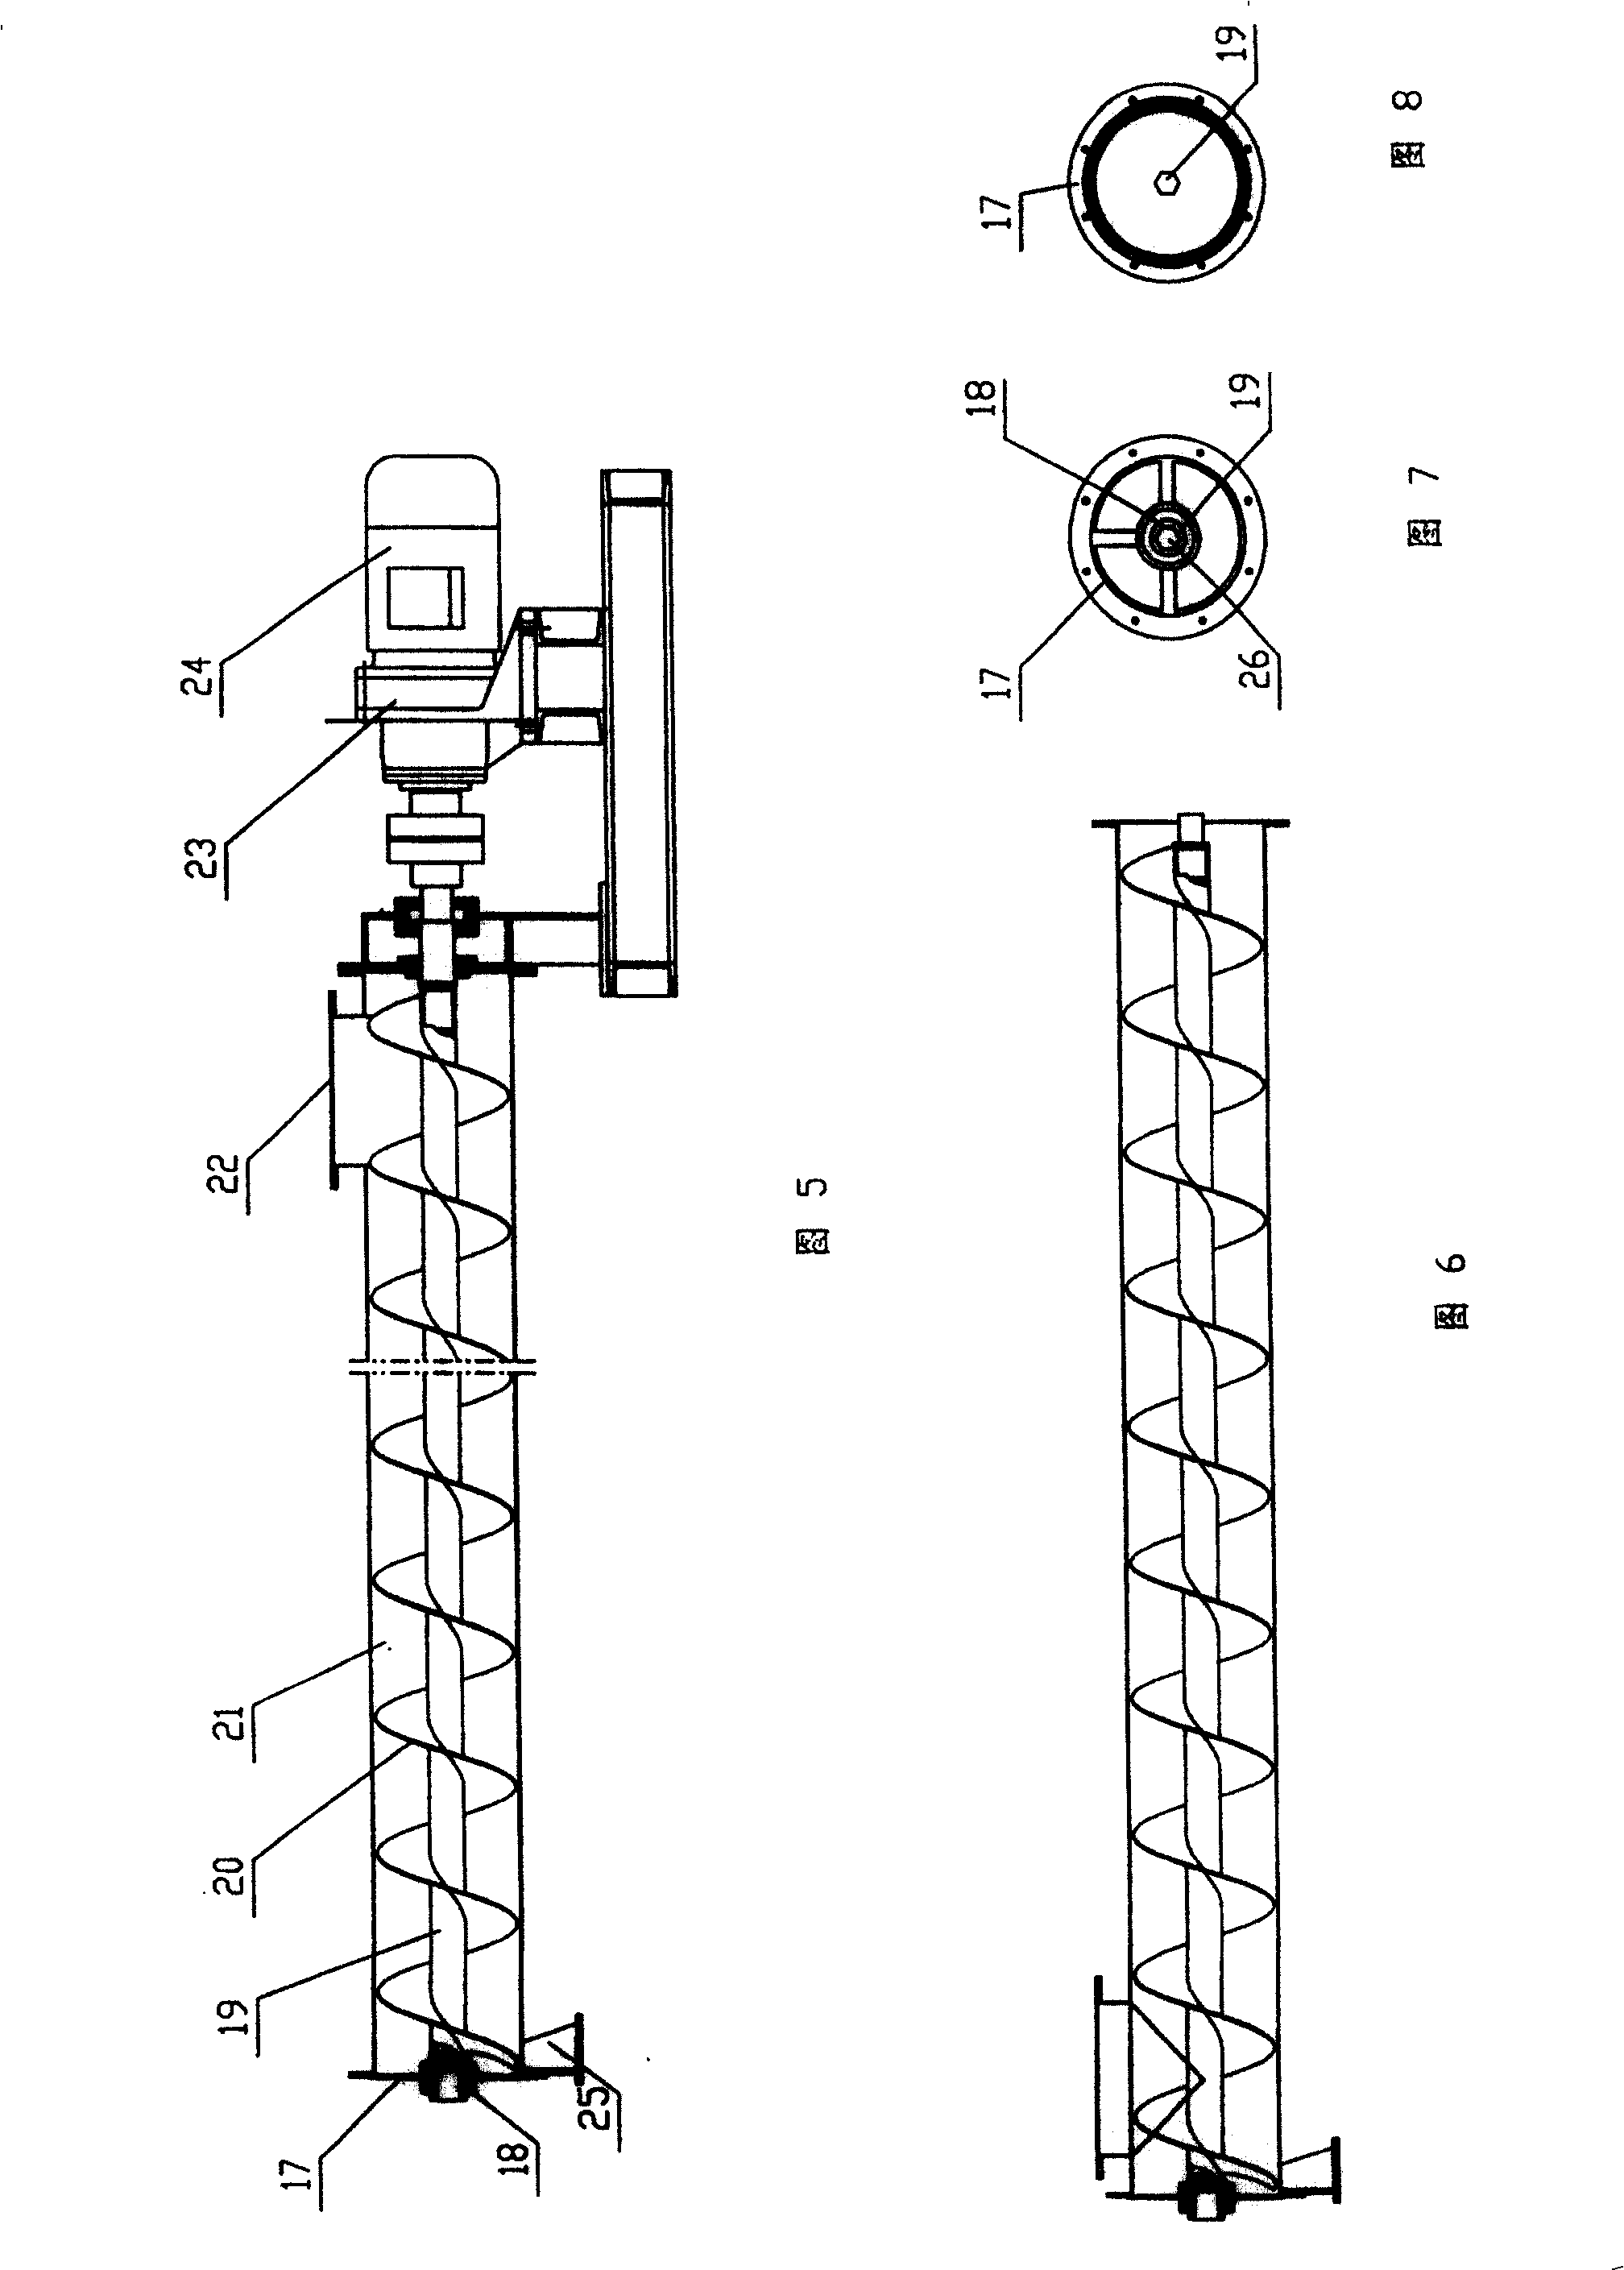 Method and apparatus for treating organic waste